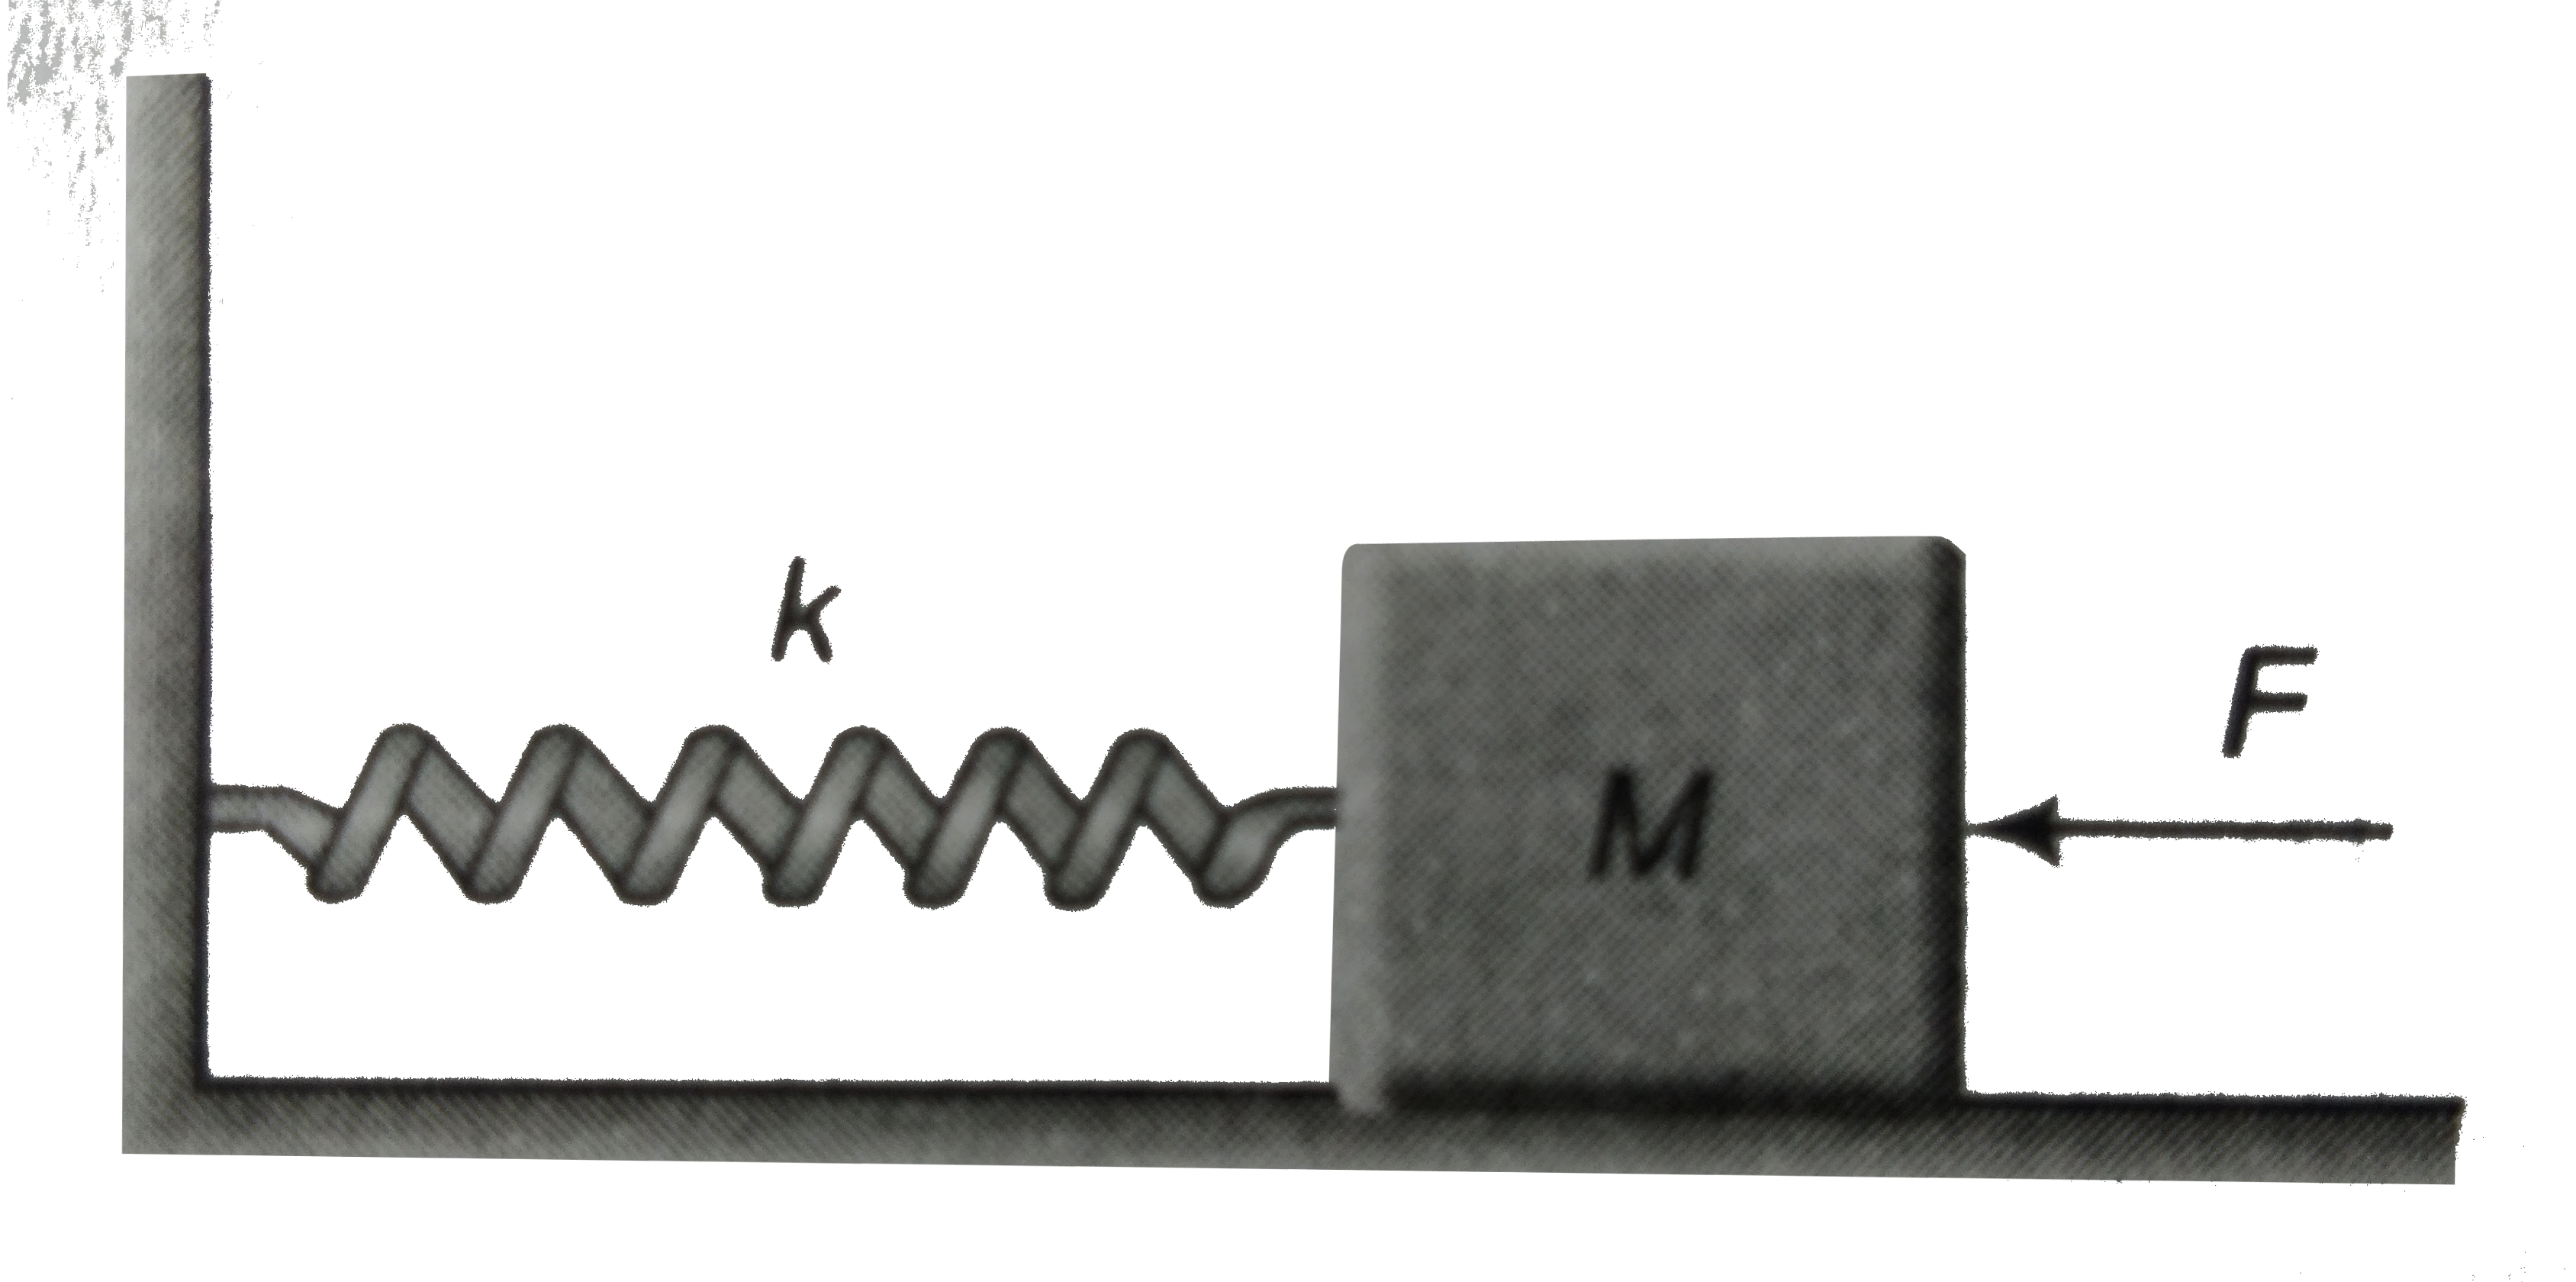 In figure, k = 100 N//m, M = 1kg and F = 10 N      (a) Find the compression of the spring in the equilibrium position    (b) A sharp blow by some external agent imparts a speed of 2 m//s to the block towards left. Find the sum of the potential energy of the spring and the kinetic energy of the block at this instant.    (c) Find the time period of the resulting simple harmonic motion.   (d) Find the amplitude.    (e) Write the potential energy of the spring when the block is at the left estreme.    (f) Write the potential energy of the spring when the block is at the right extreme.    The answers of (b), (e) and (f) are different. Explain why this does not violate the principle of conservation of energy ?